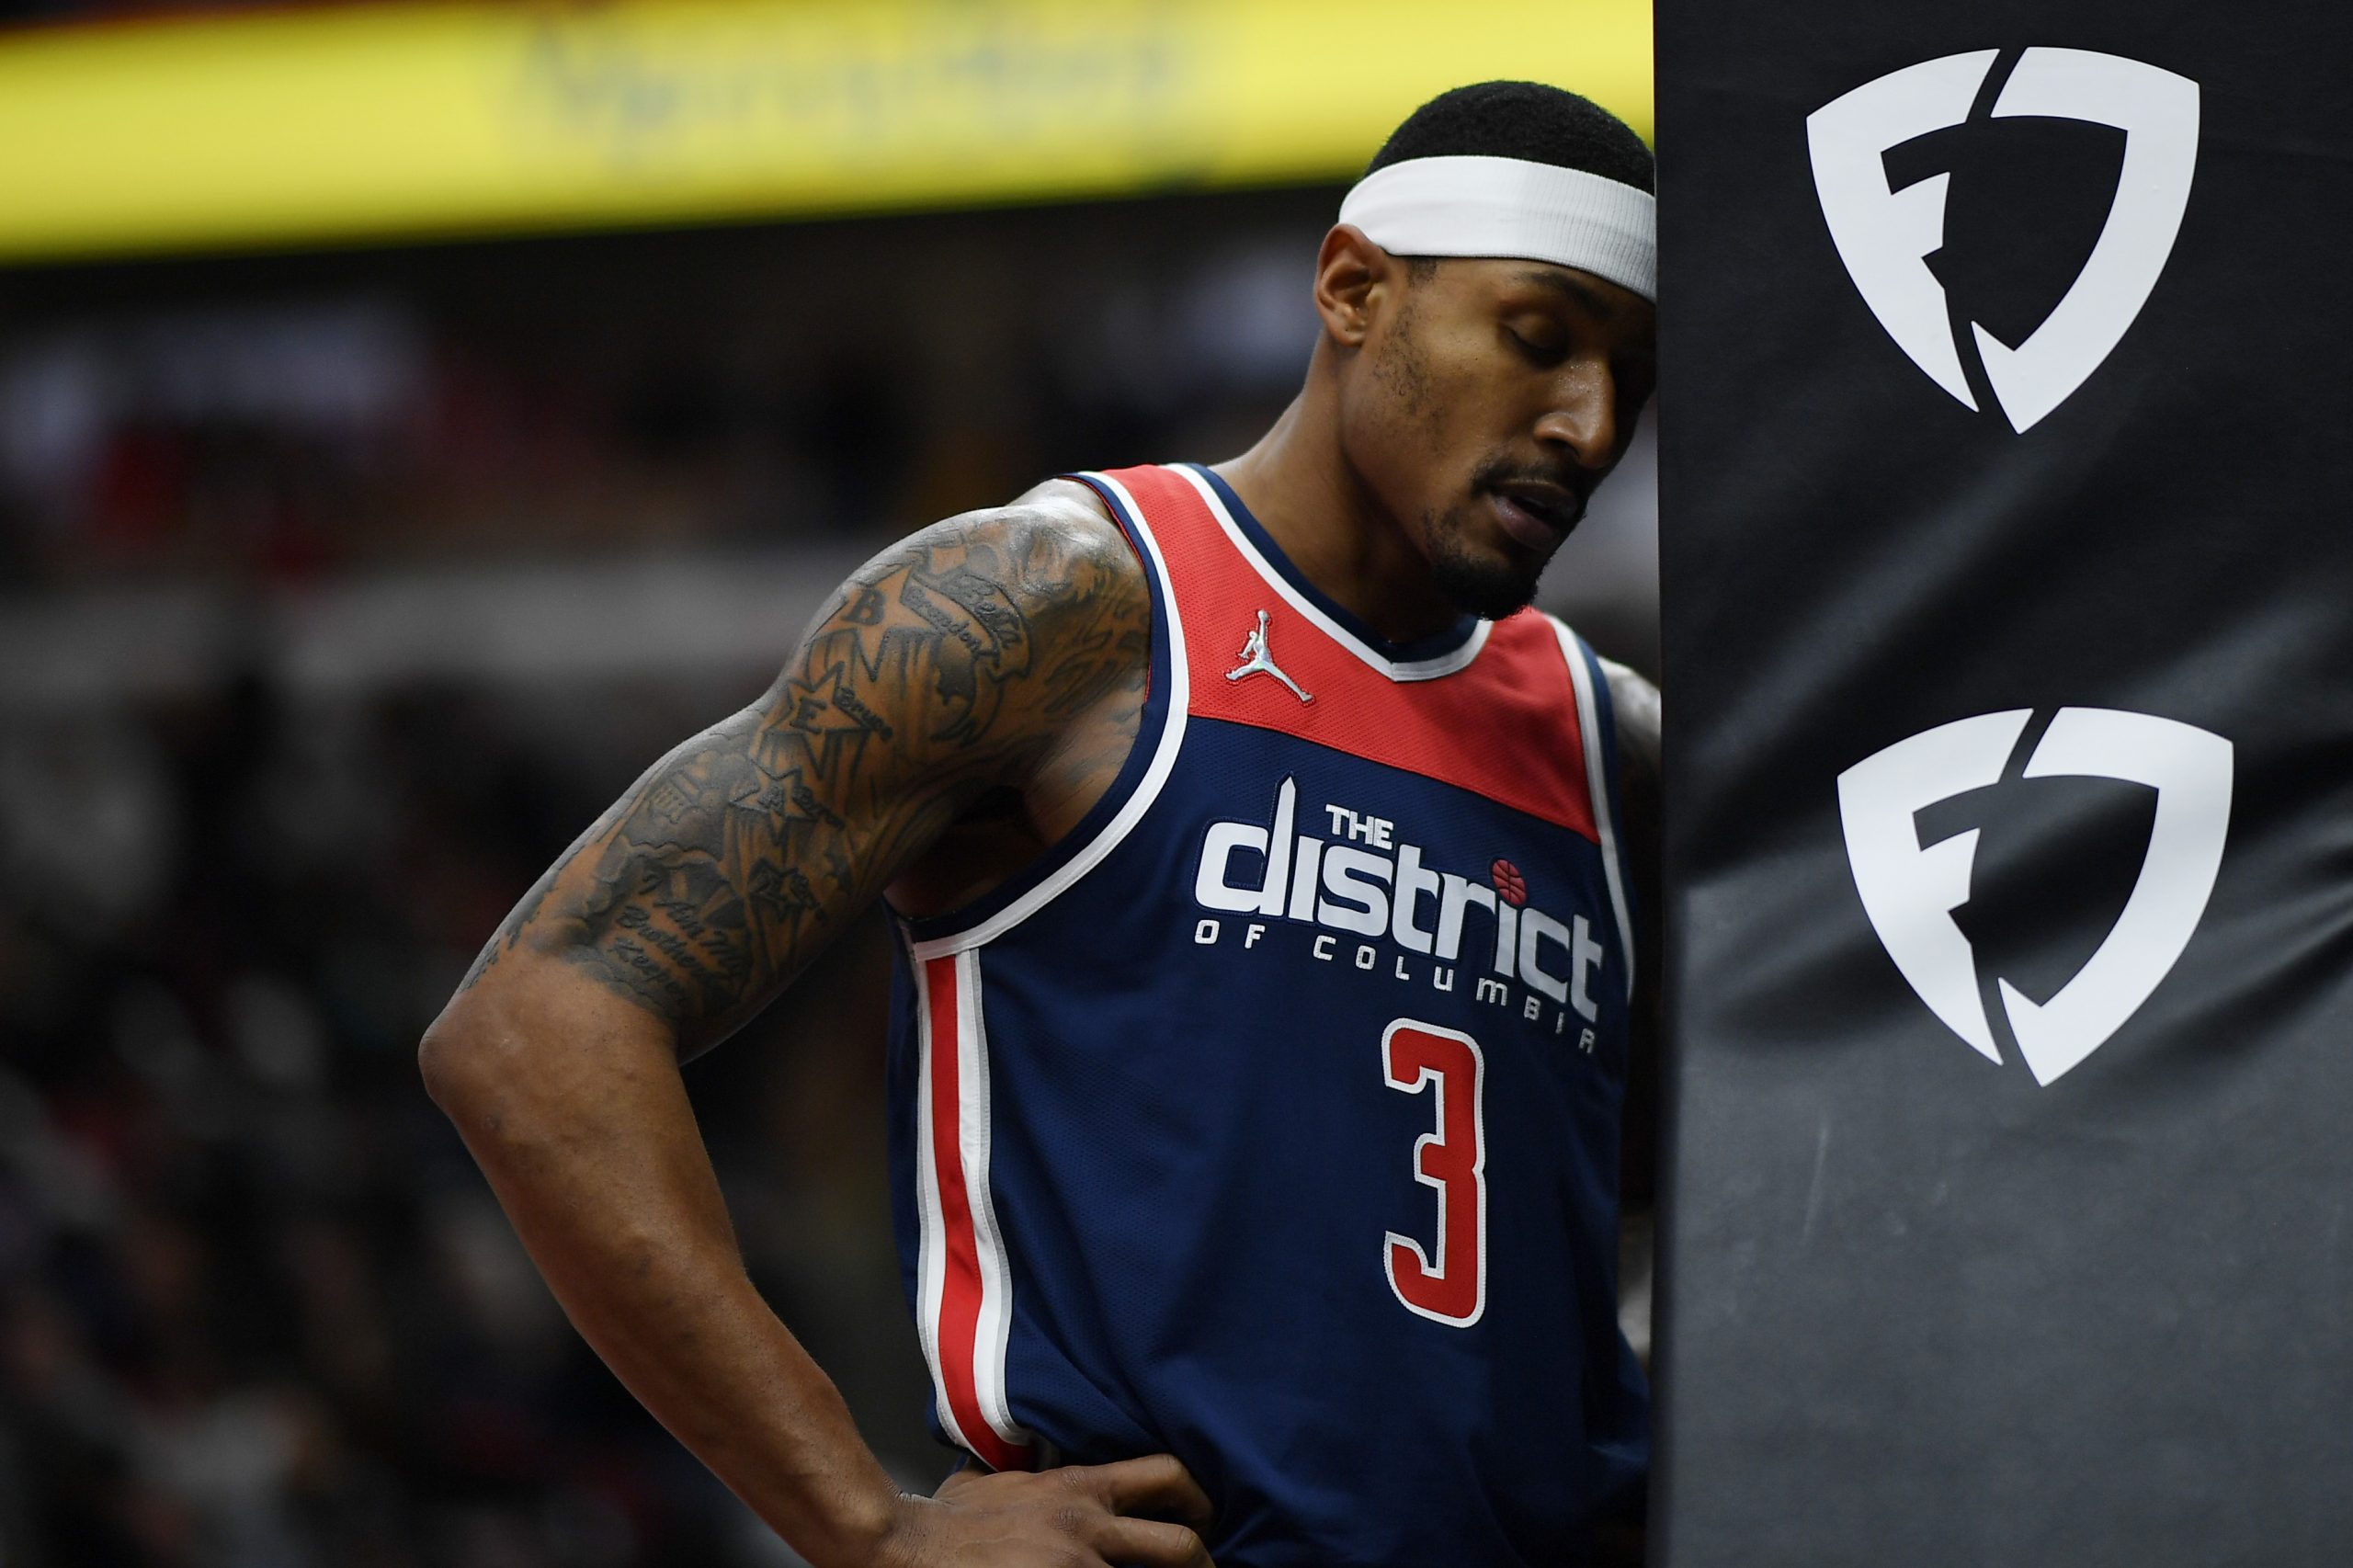 Washington Wizards superstar guard Bradley Beal rests during a recent game against the Chicago Bulls.